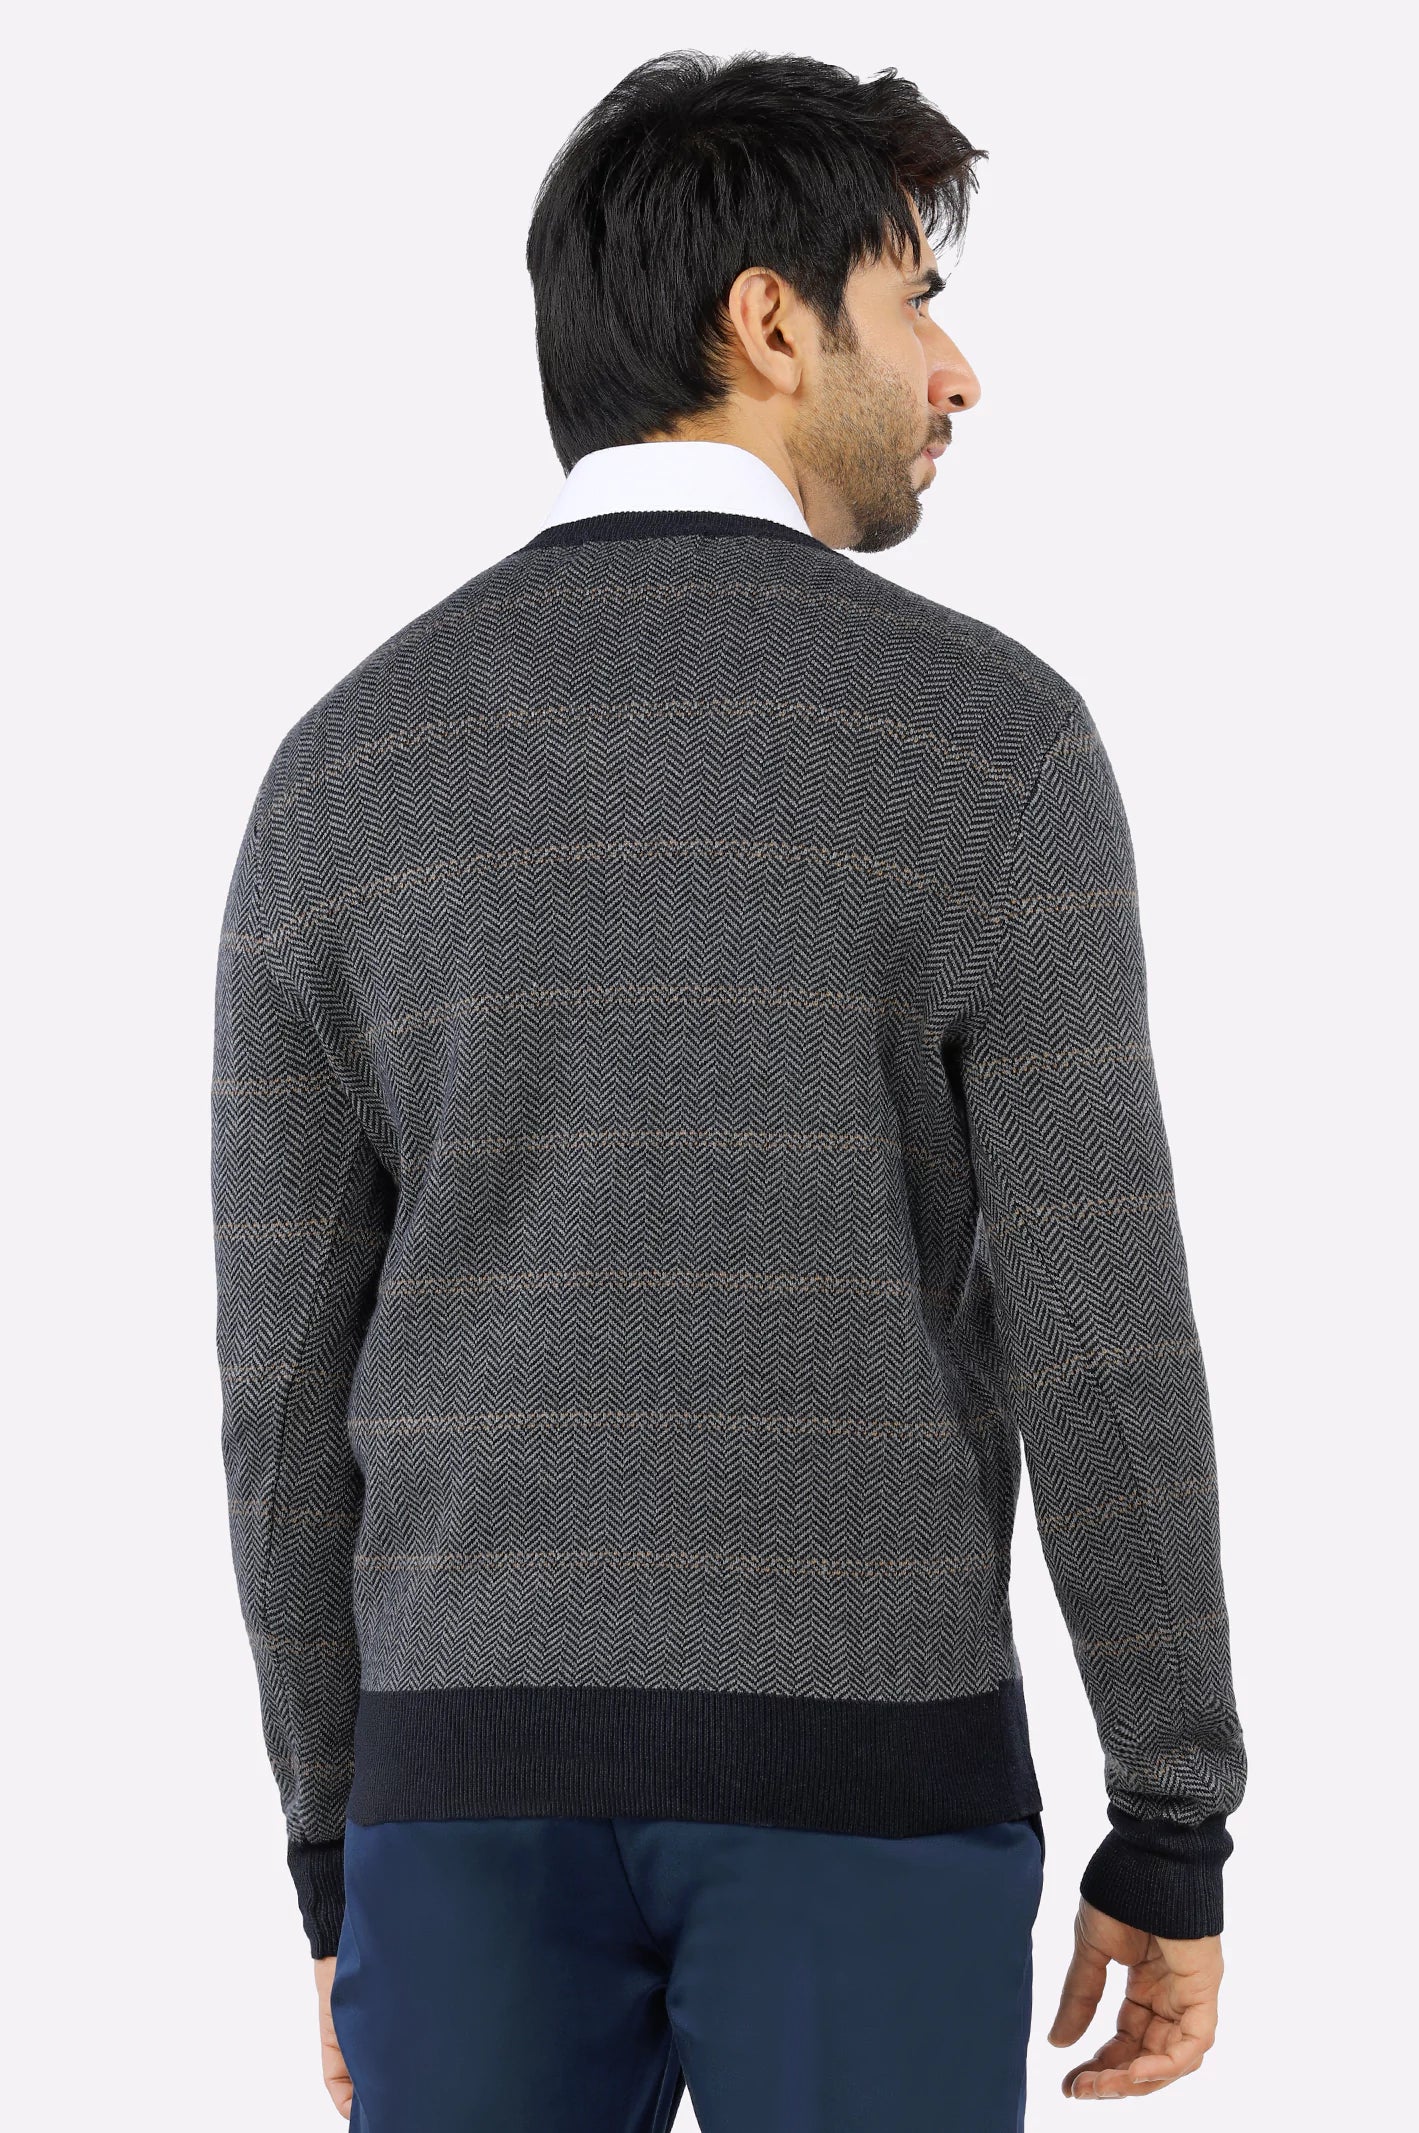 Light Grey V-Neck Gents Sweater From Diners